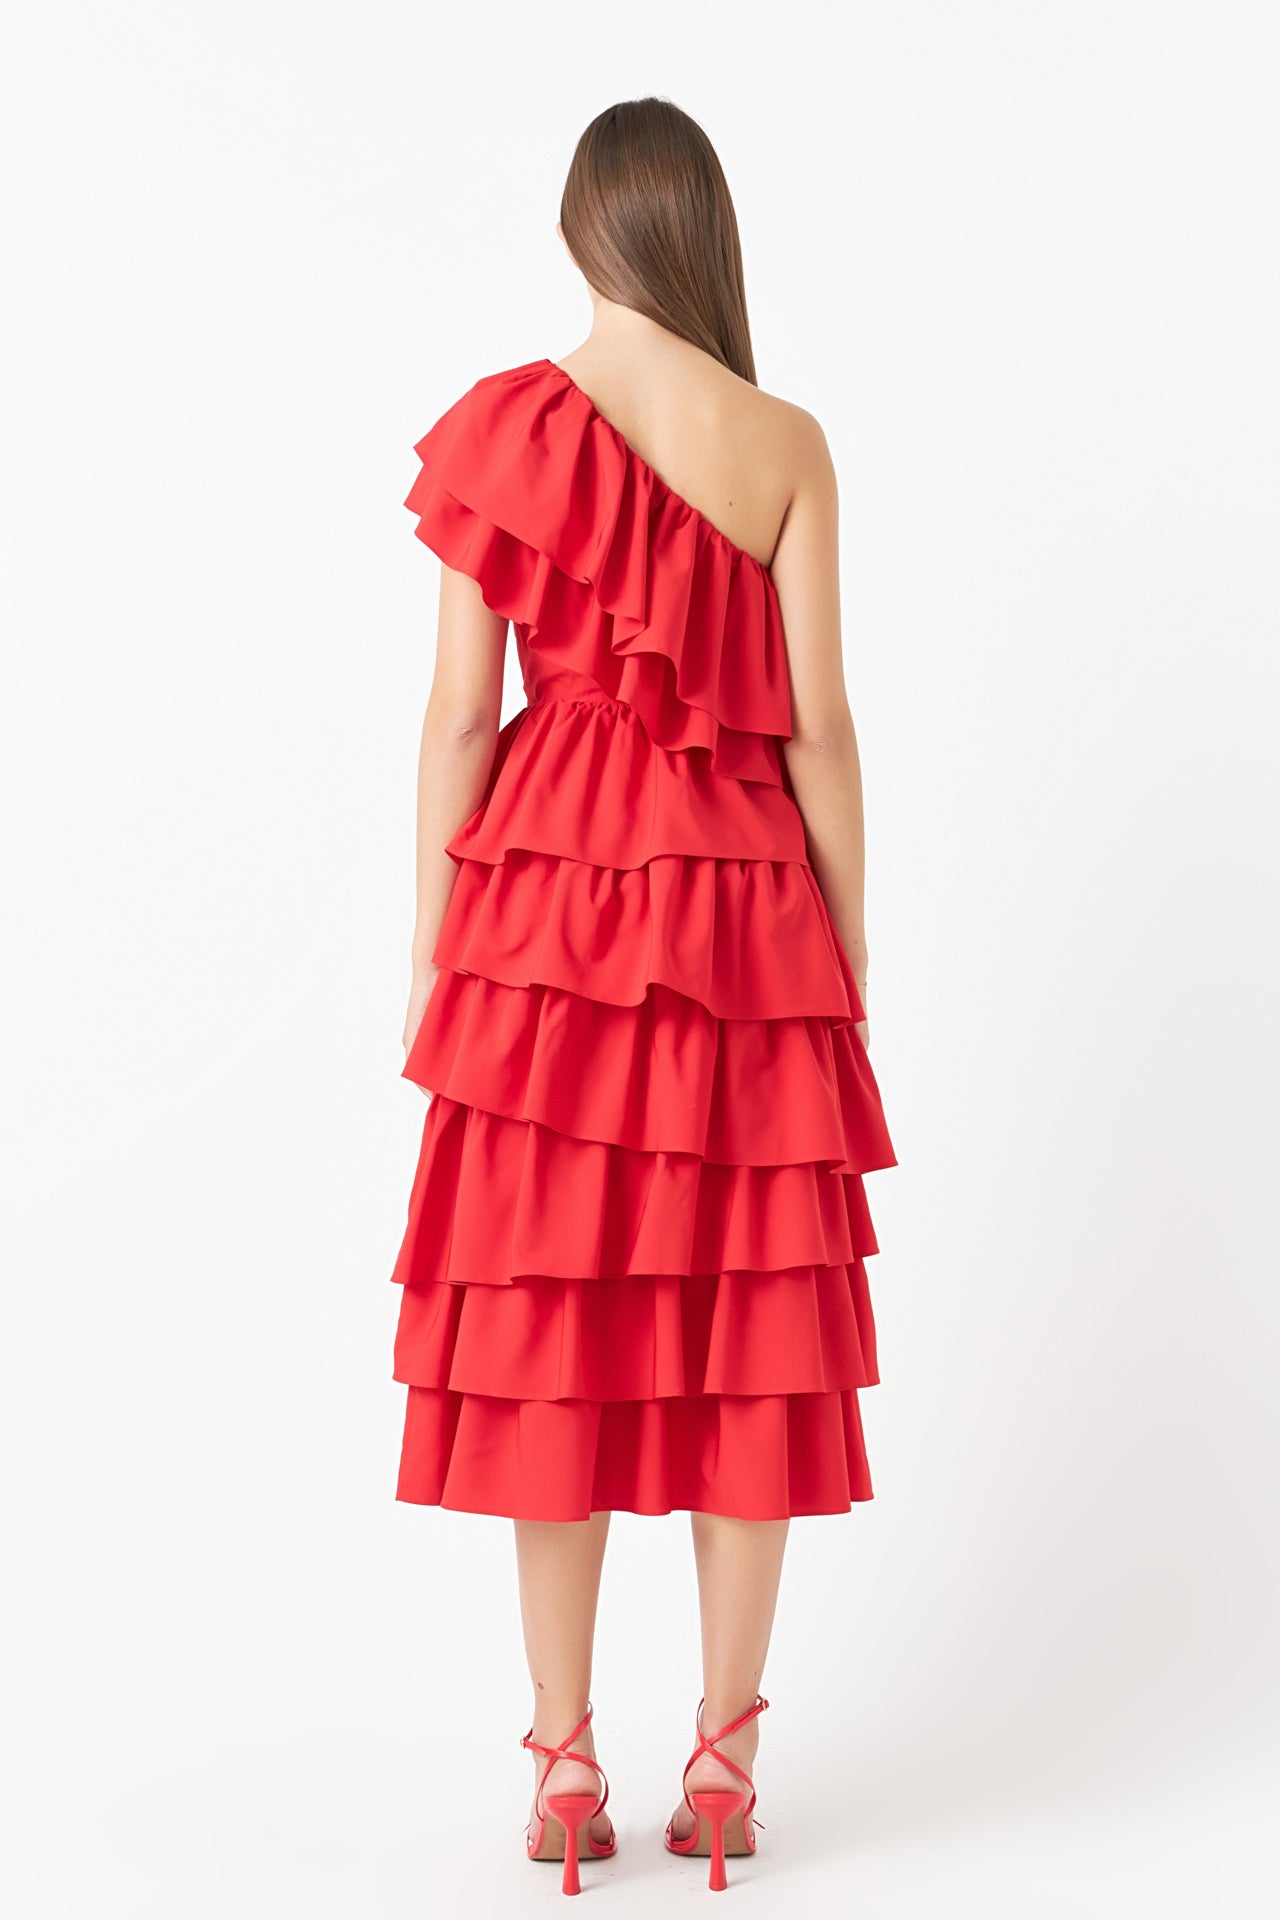 ENDLESS ROSE - One Shoulder Tiered Maxi Dress - DRESSES available at Objectrare